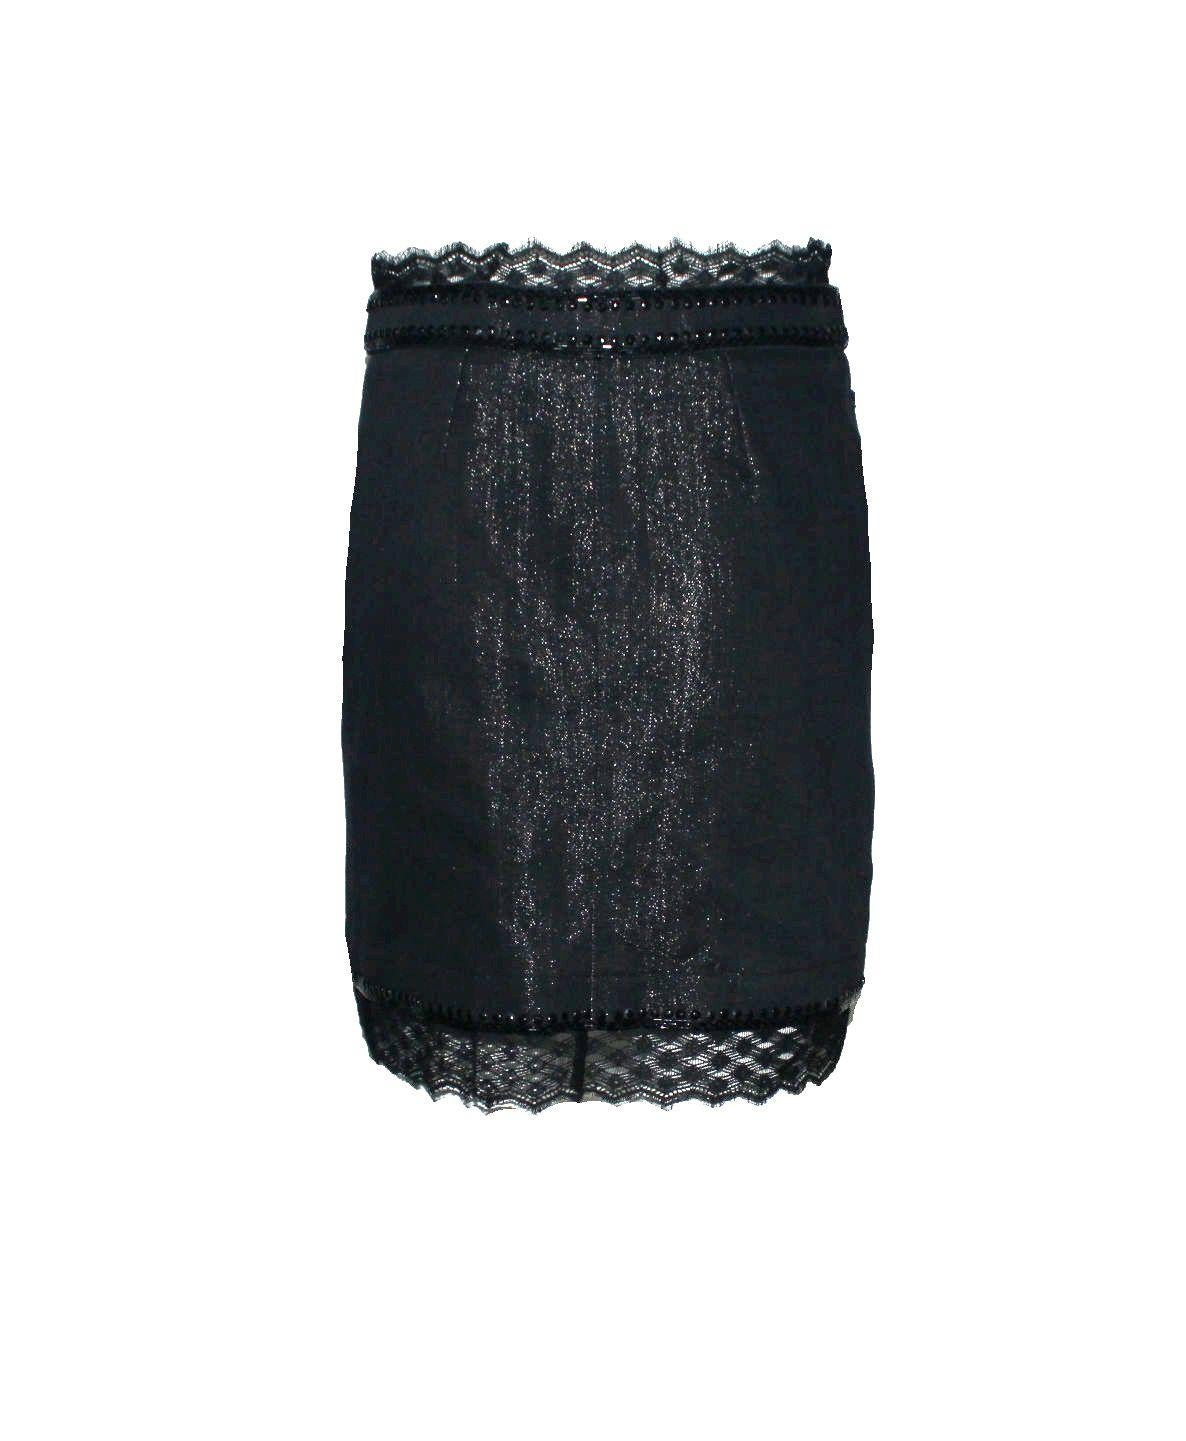 Beautiful denim & lace skirt by CHANEL
A true CHANEL signature item that will last you for many years
Gunmetal color in a beautiful sparkling denim fabric
Skirt opens with a zip and button on front
Jet-black embellishement on waist
Lace trimming on